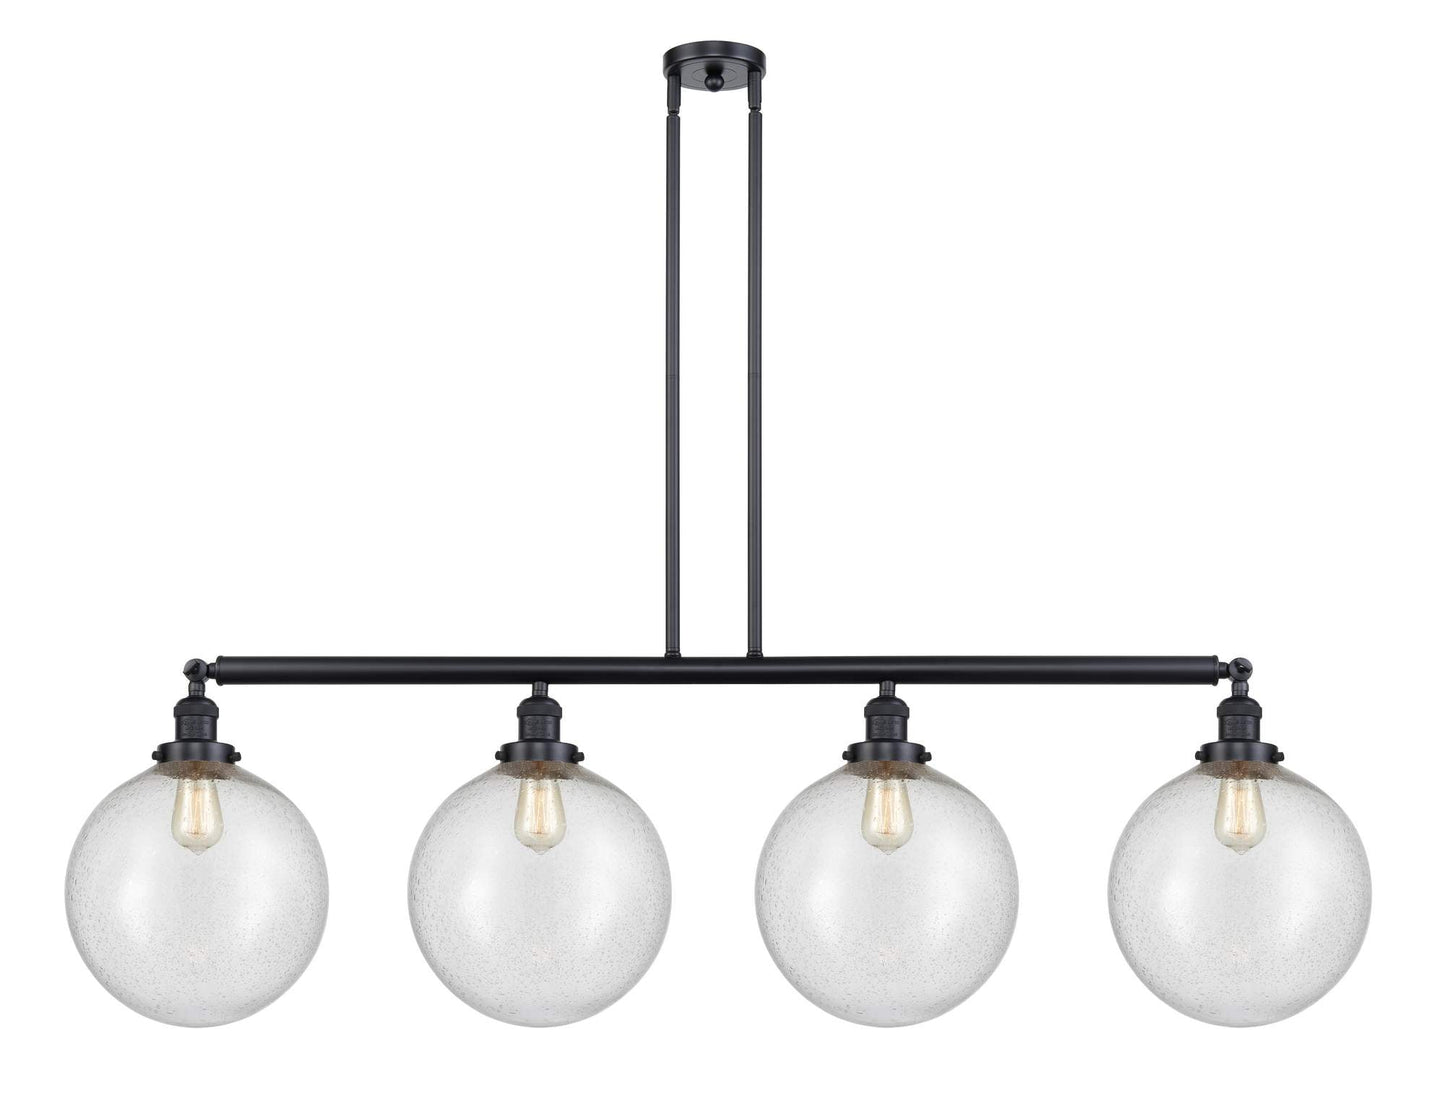 214-BK-G204-12 4-Light 56" Matte Black Island Light - Seedy Beacon Glass - LED Bulb - Dimmensions: 56 x 12 x 16<br>Minimum Height : 26<br>Maximum Height : 50 - Sloped Ceiling Compatible: Yes